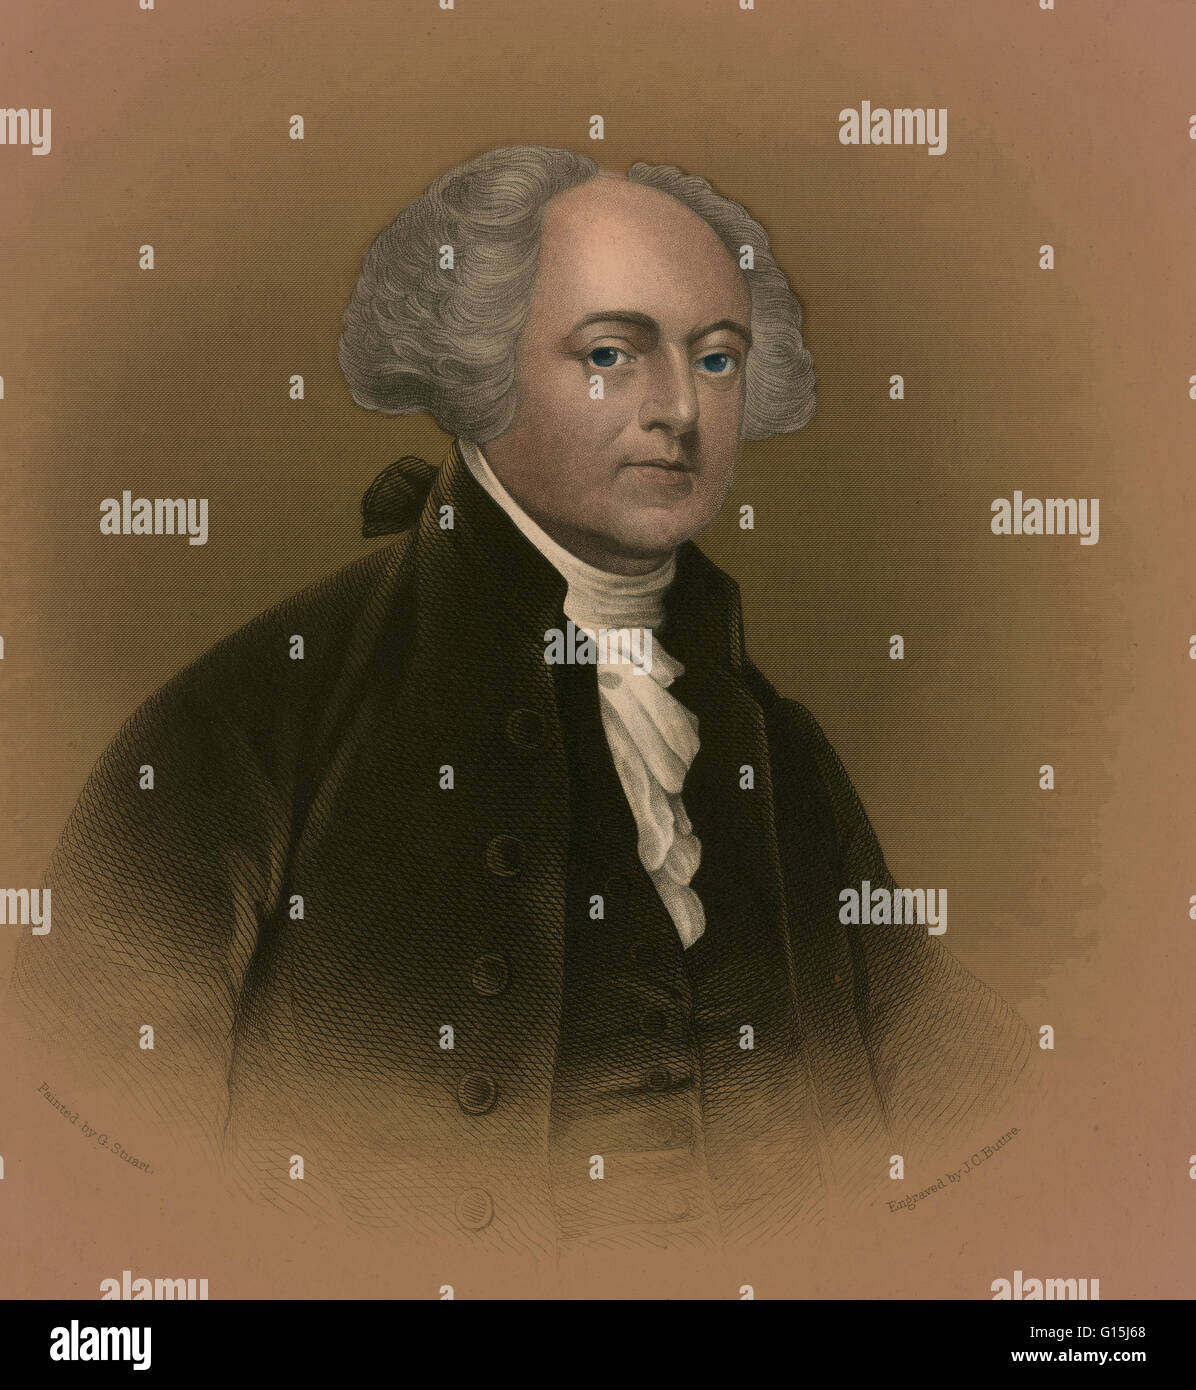 John Adams (October 19, 1735 - July 4, 1826) was an American lawyer, statesman, diplomat and political theorist. A leading champion of independence in 1776, he was the second President of the United States (1797-1801). Adams, a prominent lawyer and public Stock Photo